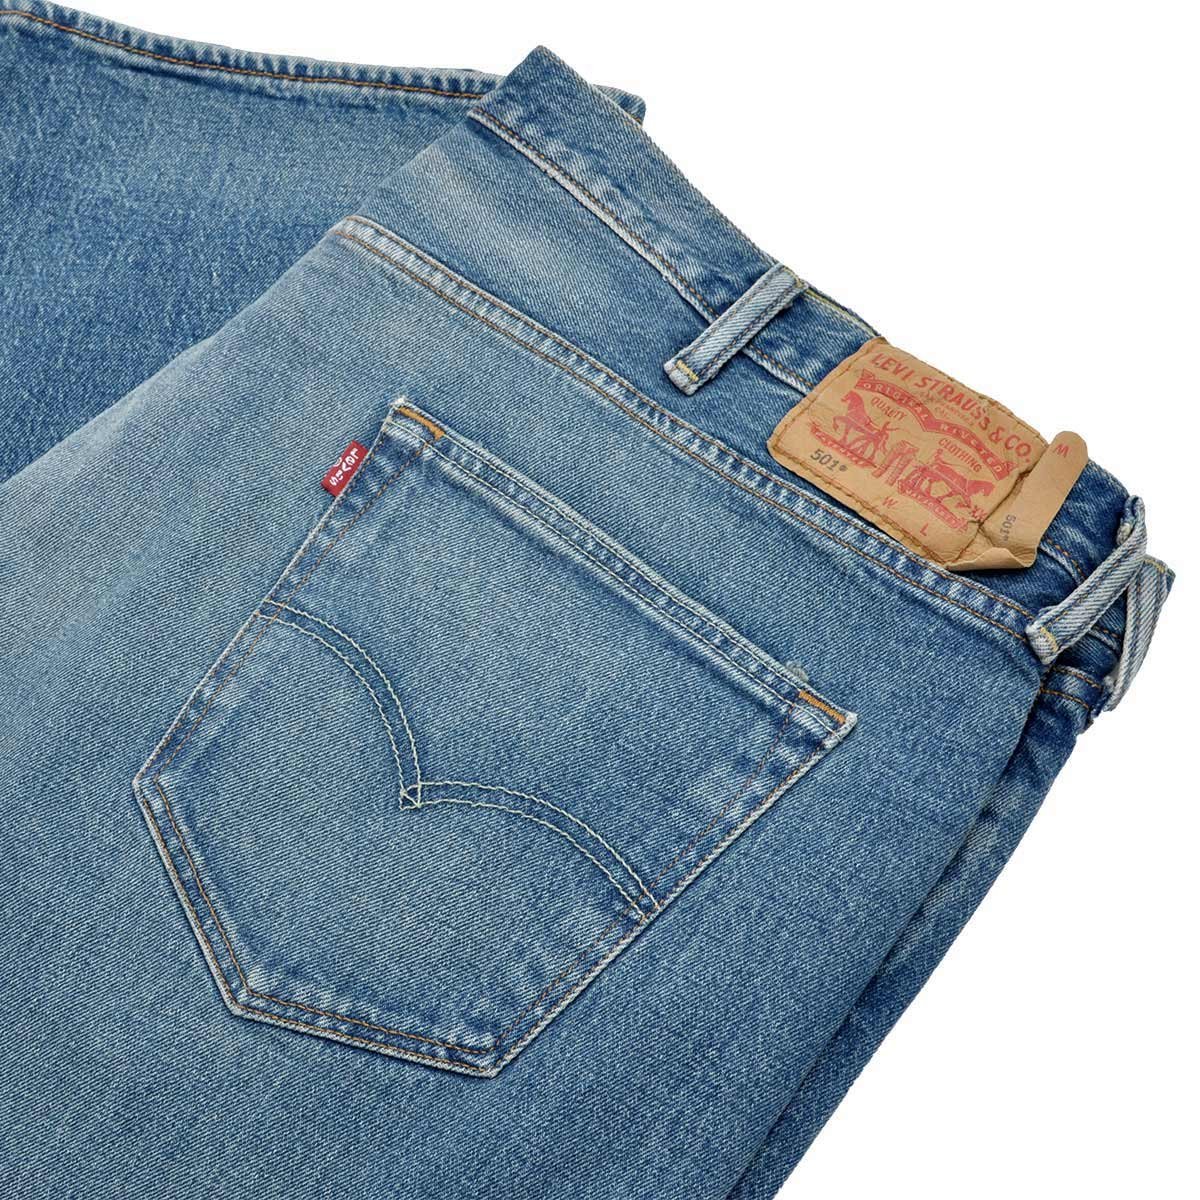 sears levi's 501 button fly